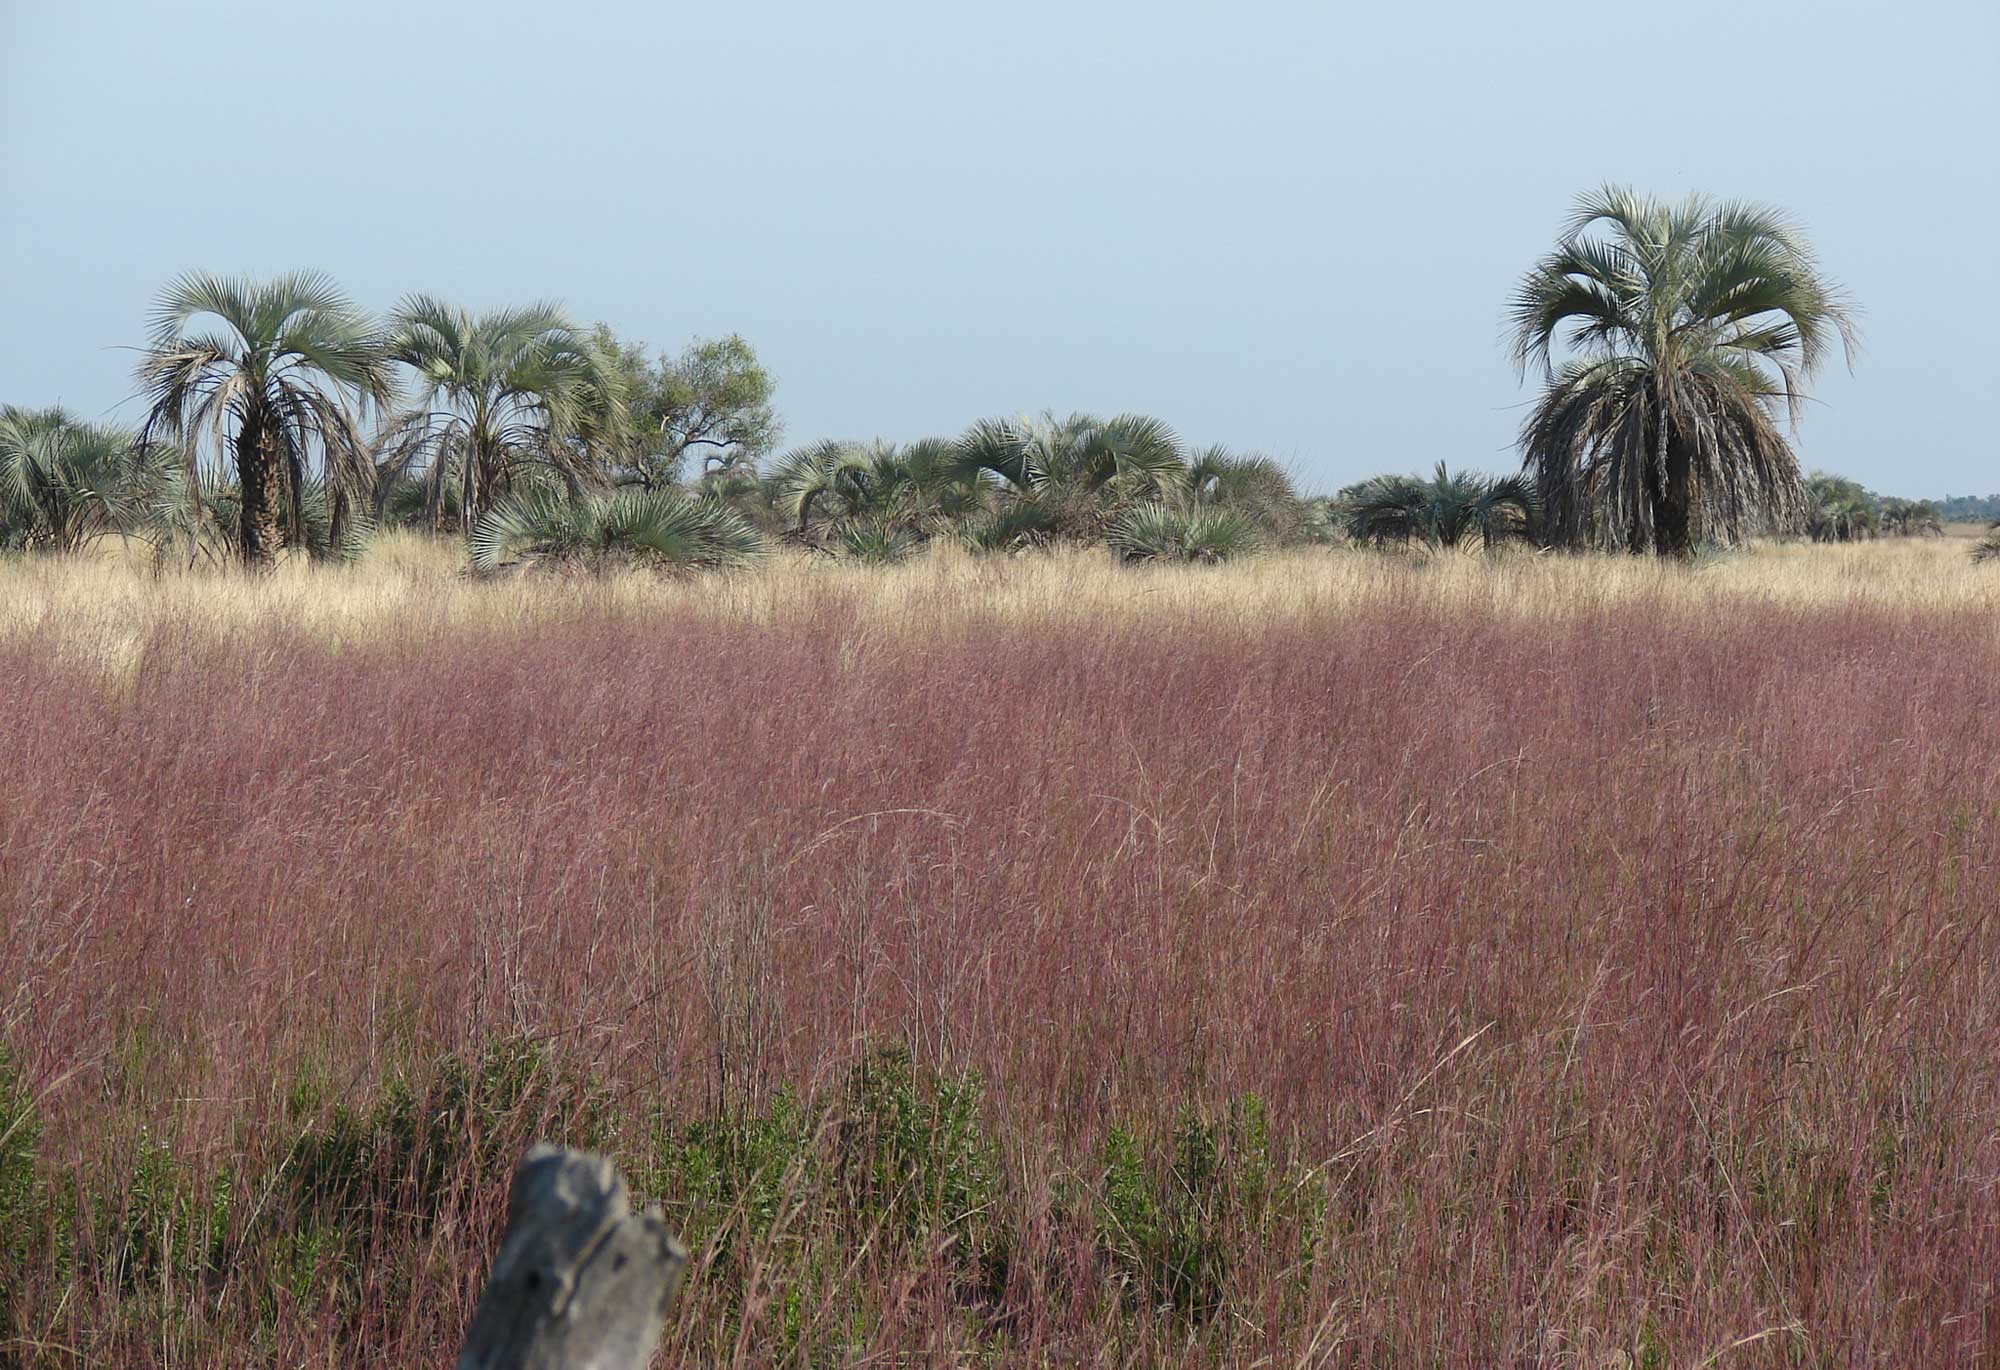 Photograph of a field of red-brown-colored grass with palm trees in the background.